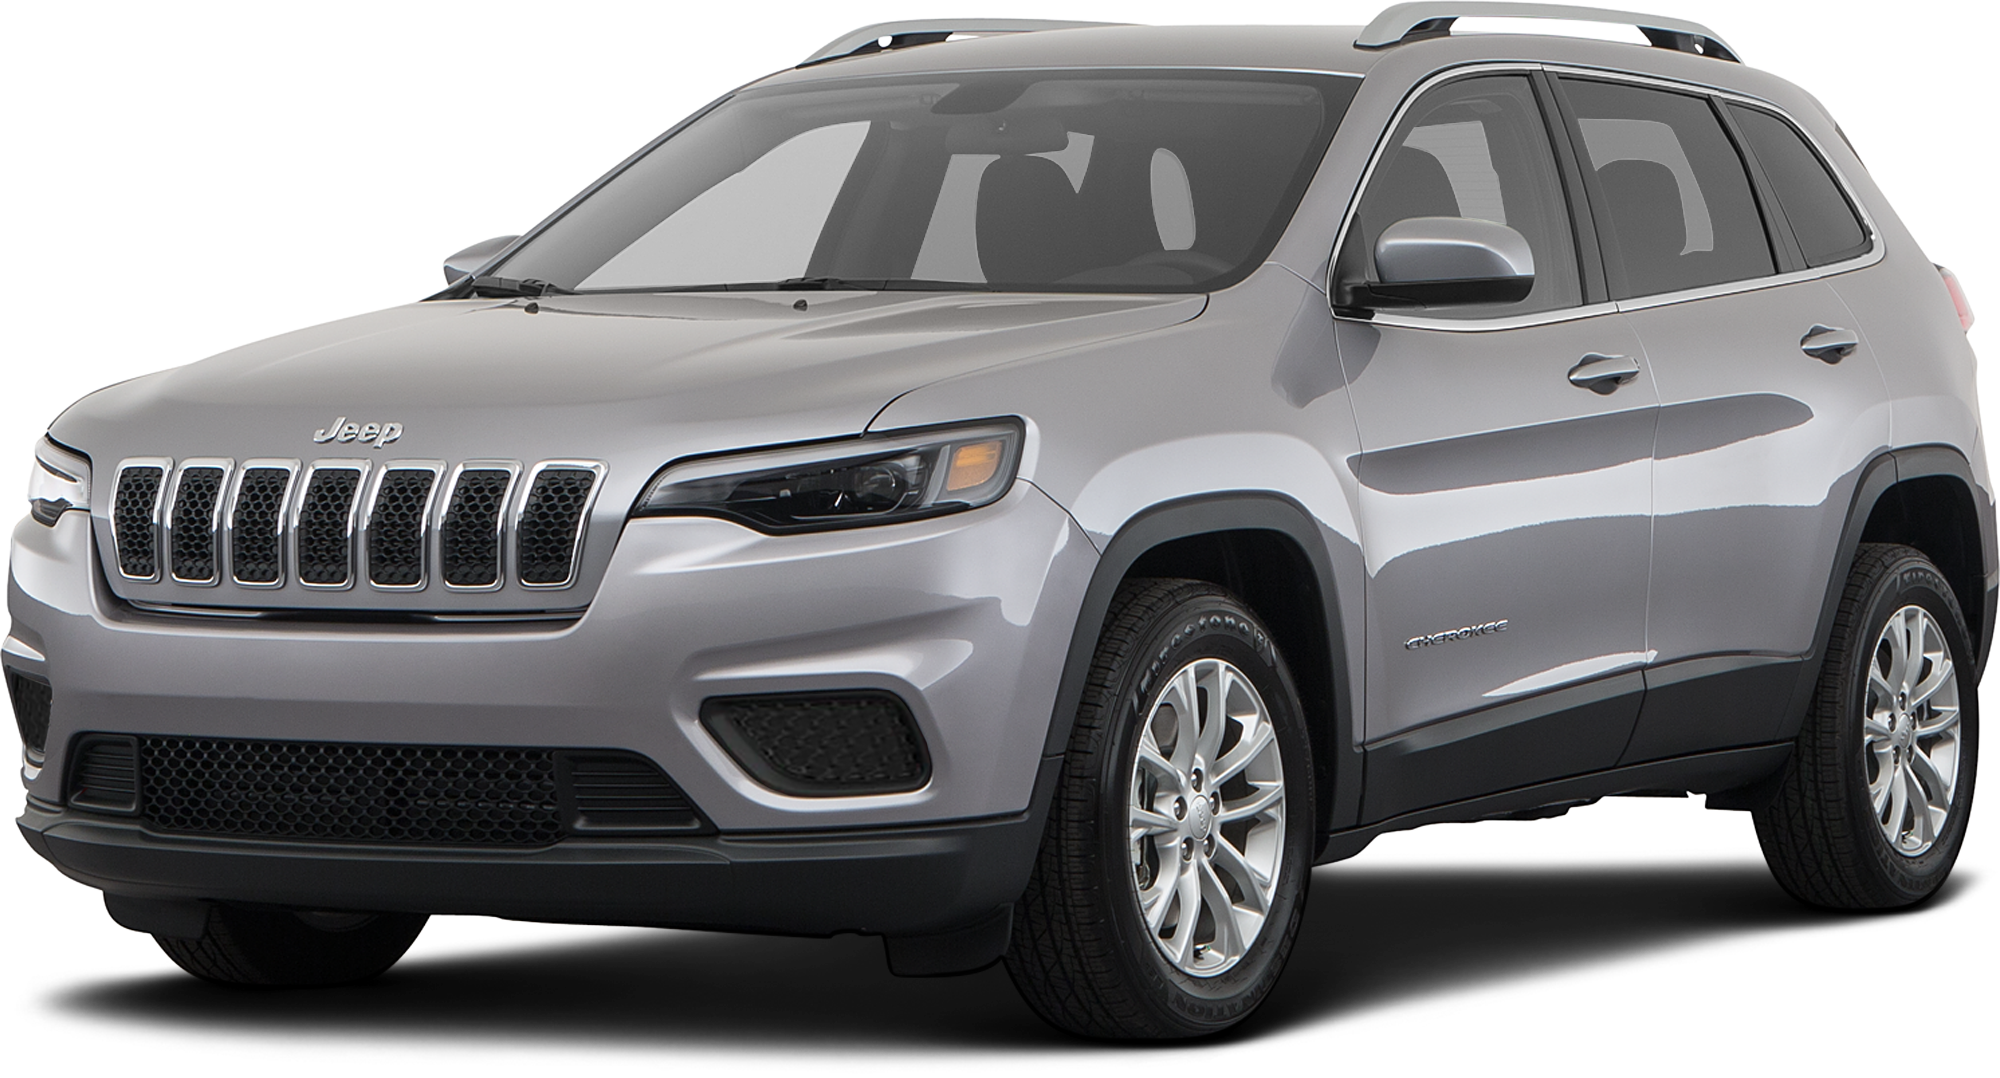 2021 Jeep Cherokee Incentives, Specials & Offers in White